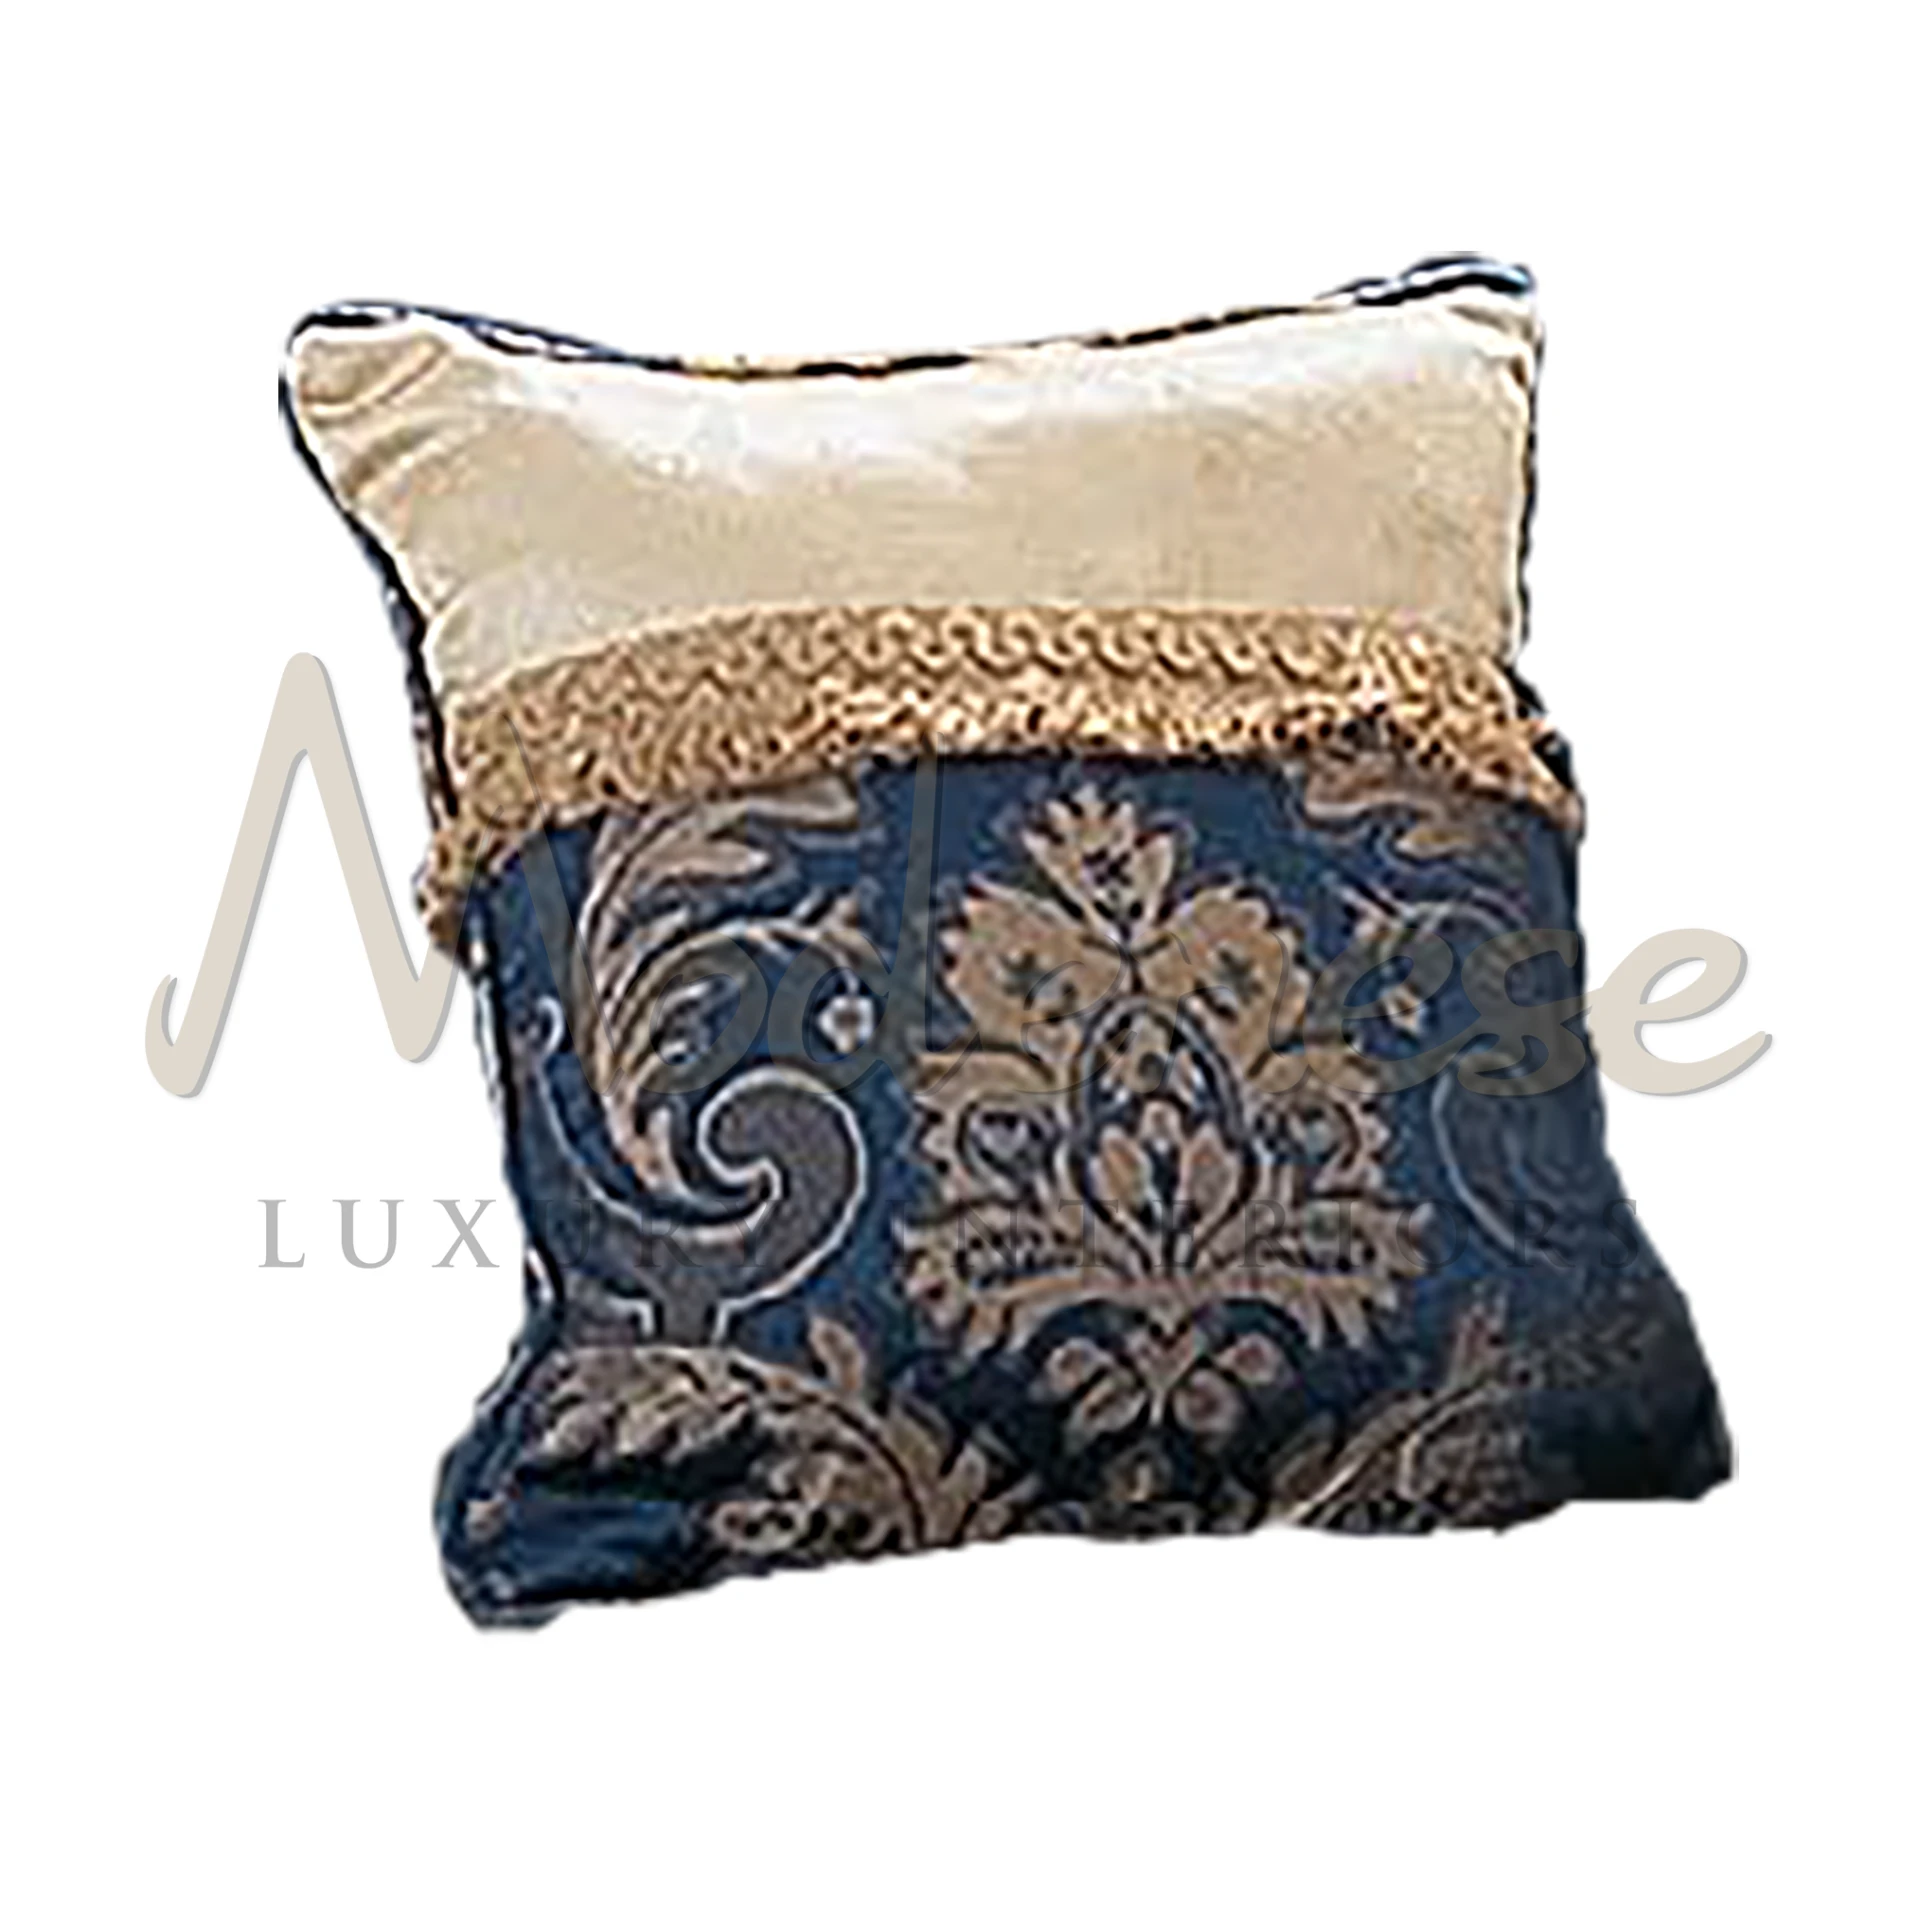 Baroque Blue Pillow with intricate designs, showcasing the luxury and sophistication of Italian-made classical textiles.